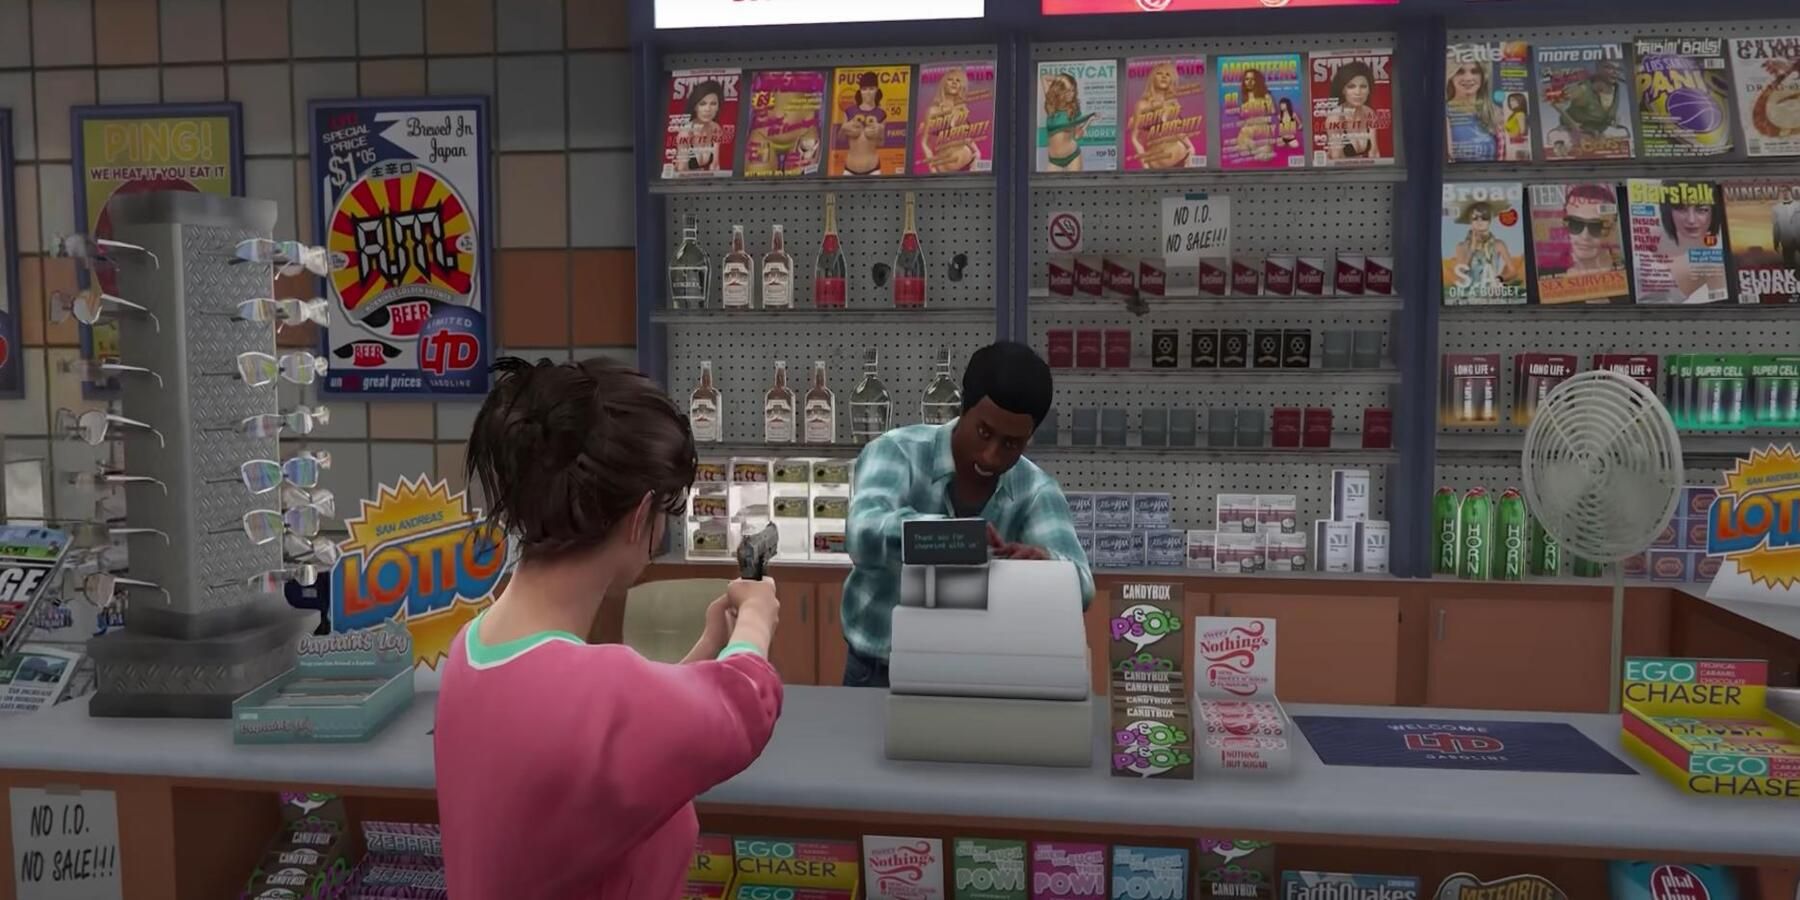 GTA 6 listed for 2020 release by retailer Gameware, probably fake